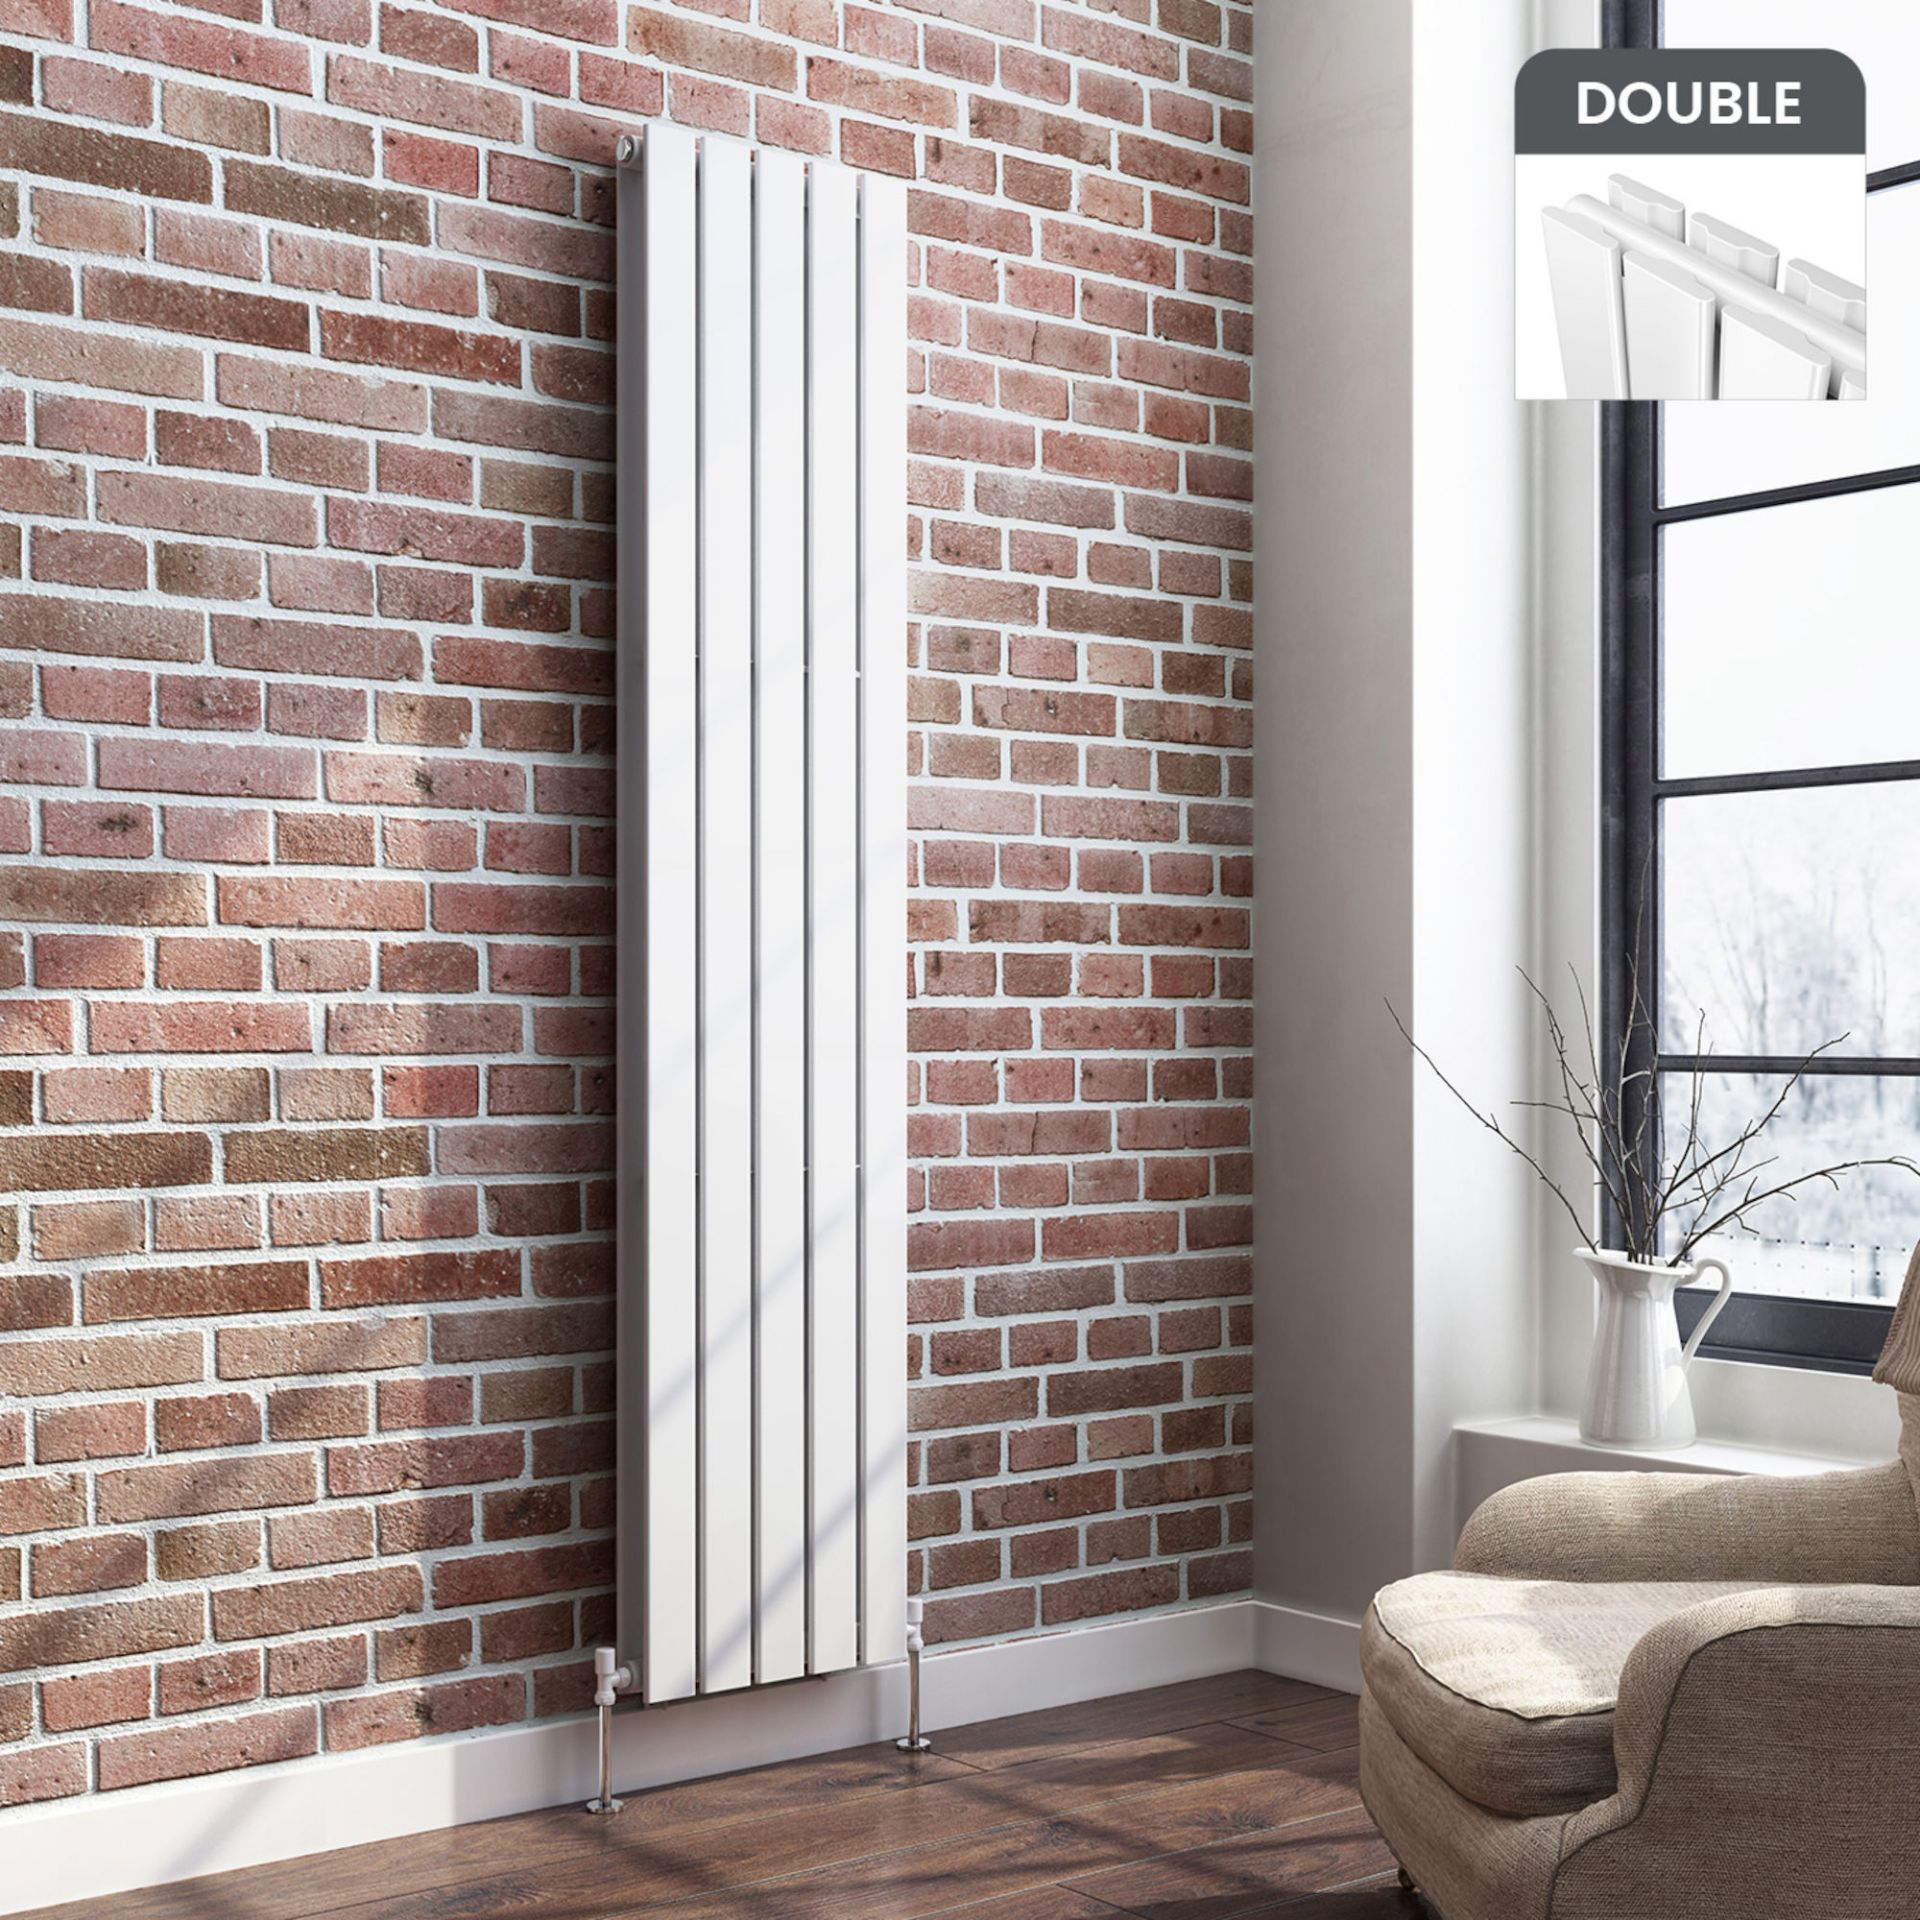 1600x360mm Gloss White Double Flat Panel Vertical Radiator. RRP £407.99. Made with low carbon